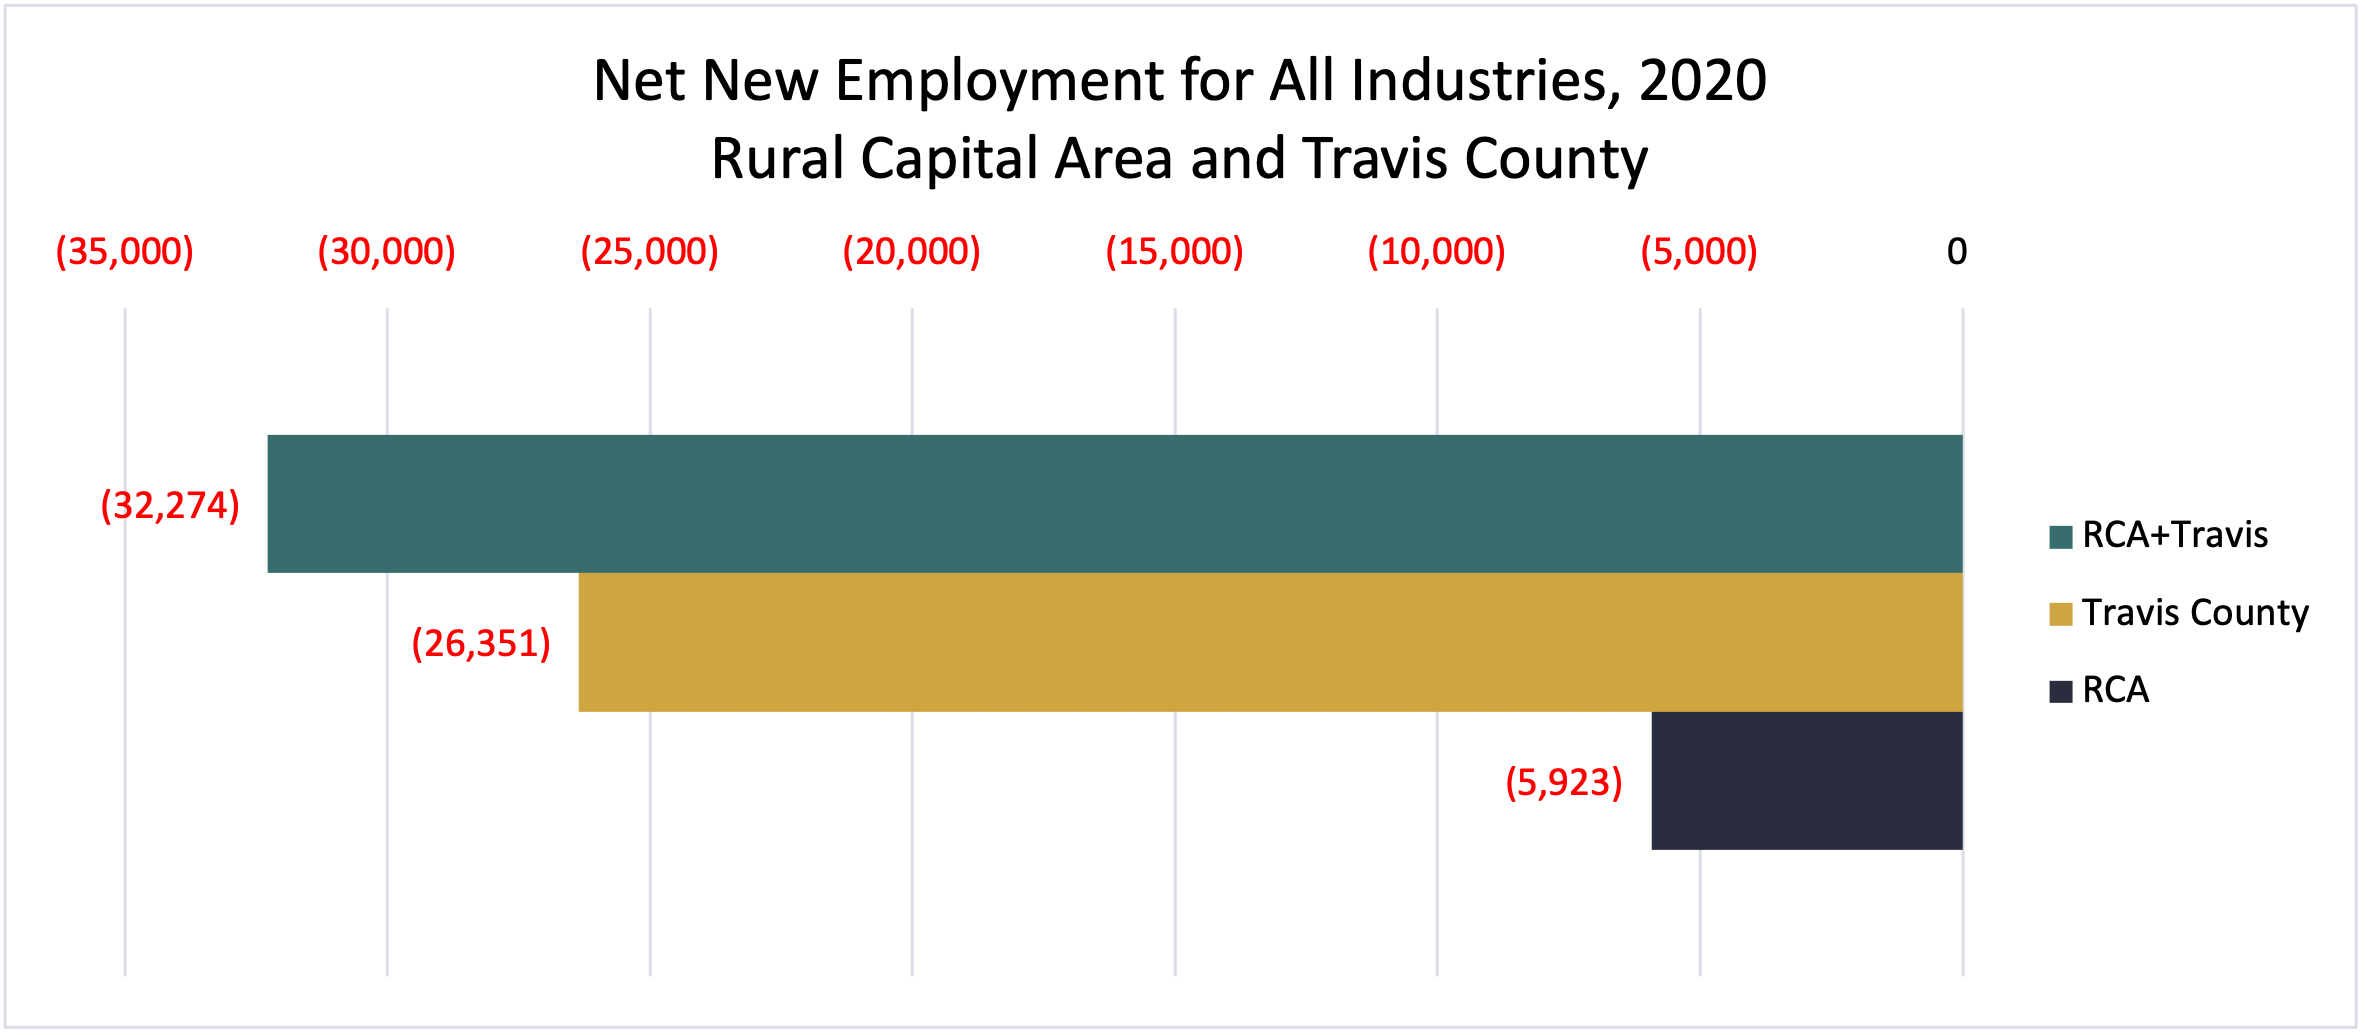 Rural Capital Area Net Employment All Industries 2019 to 2020